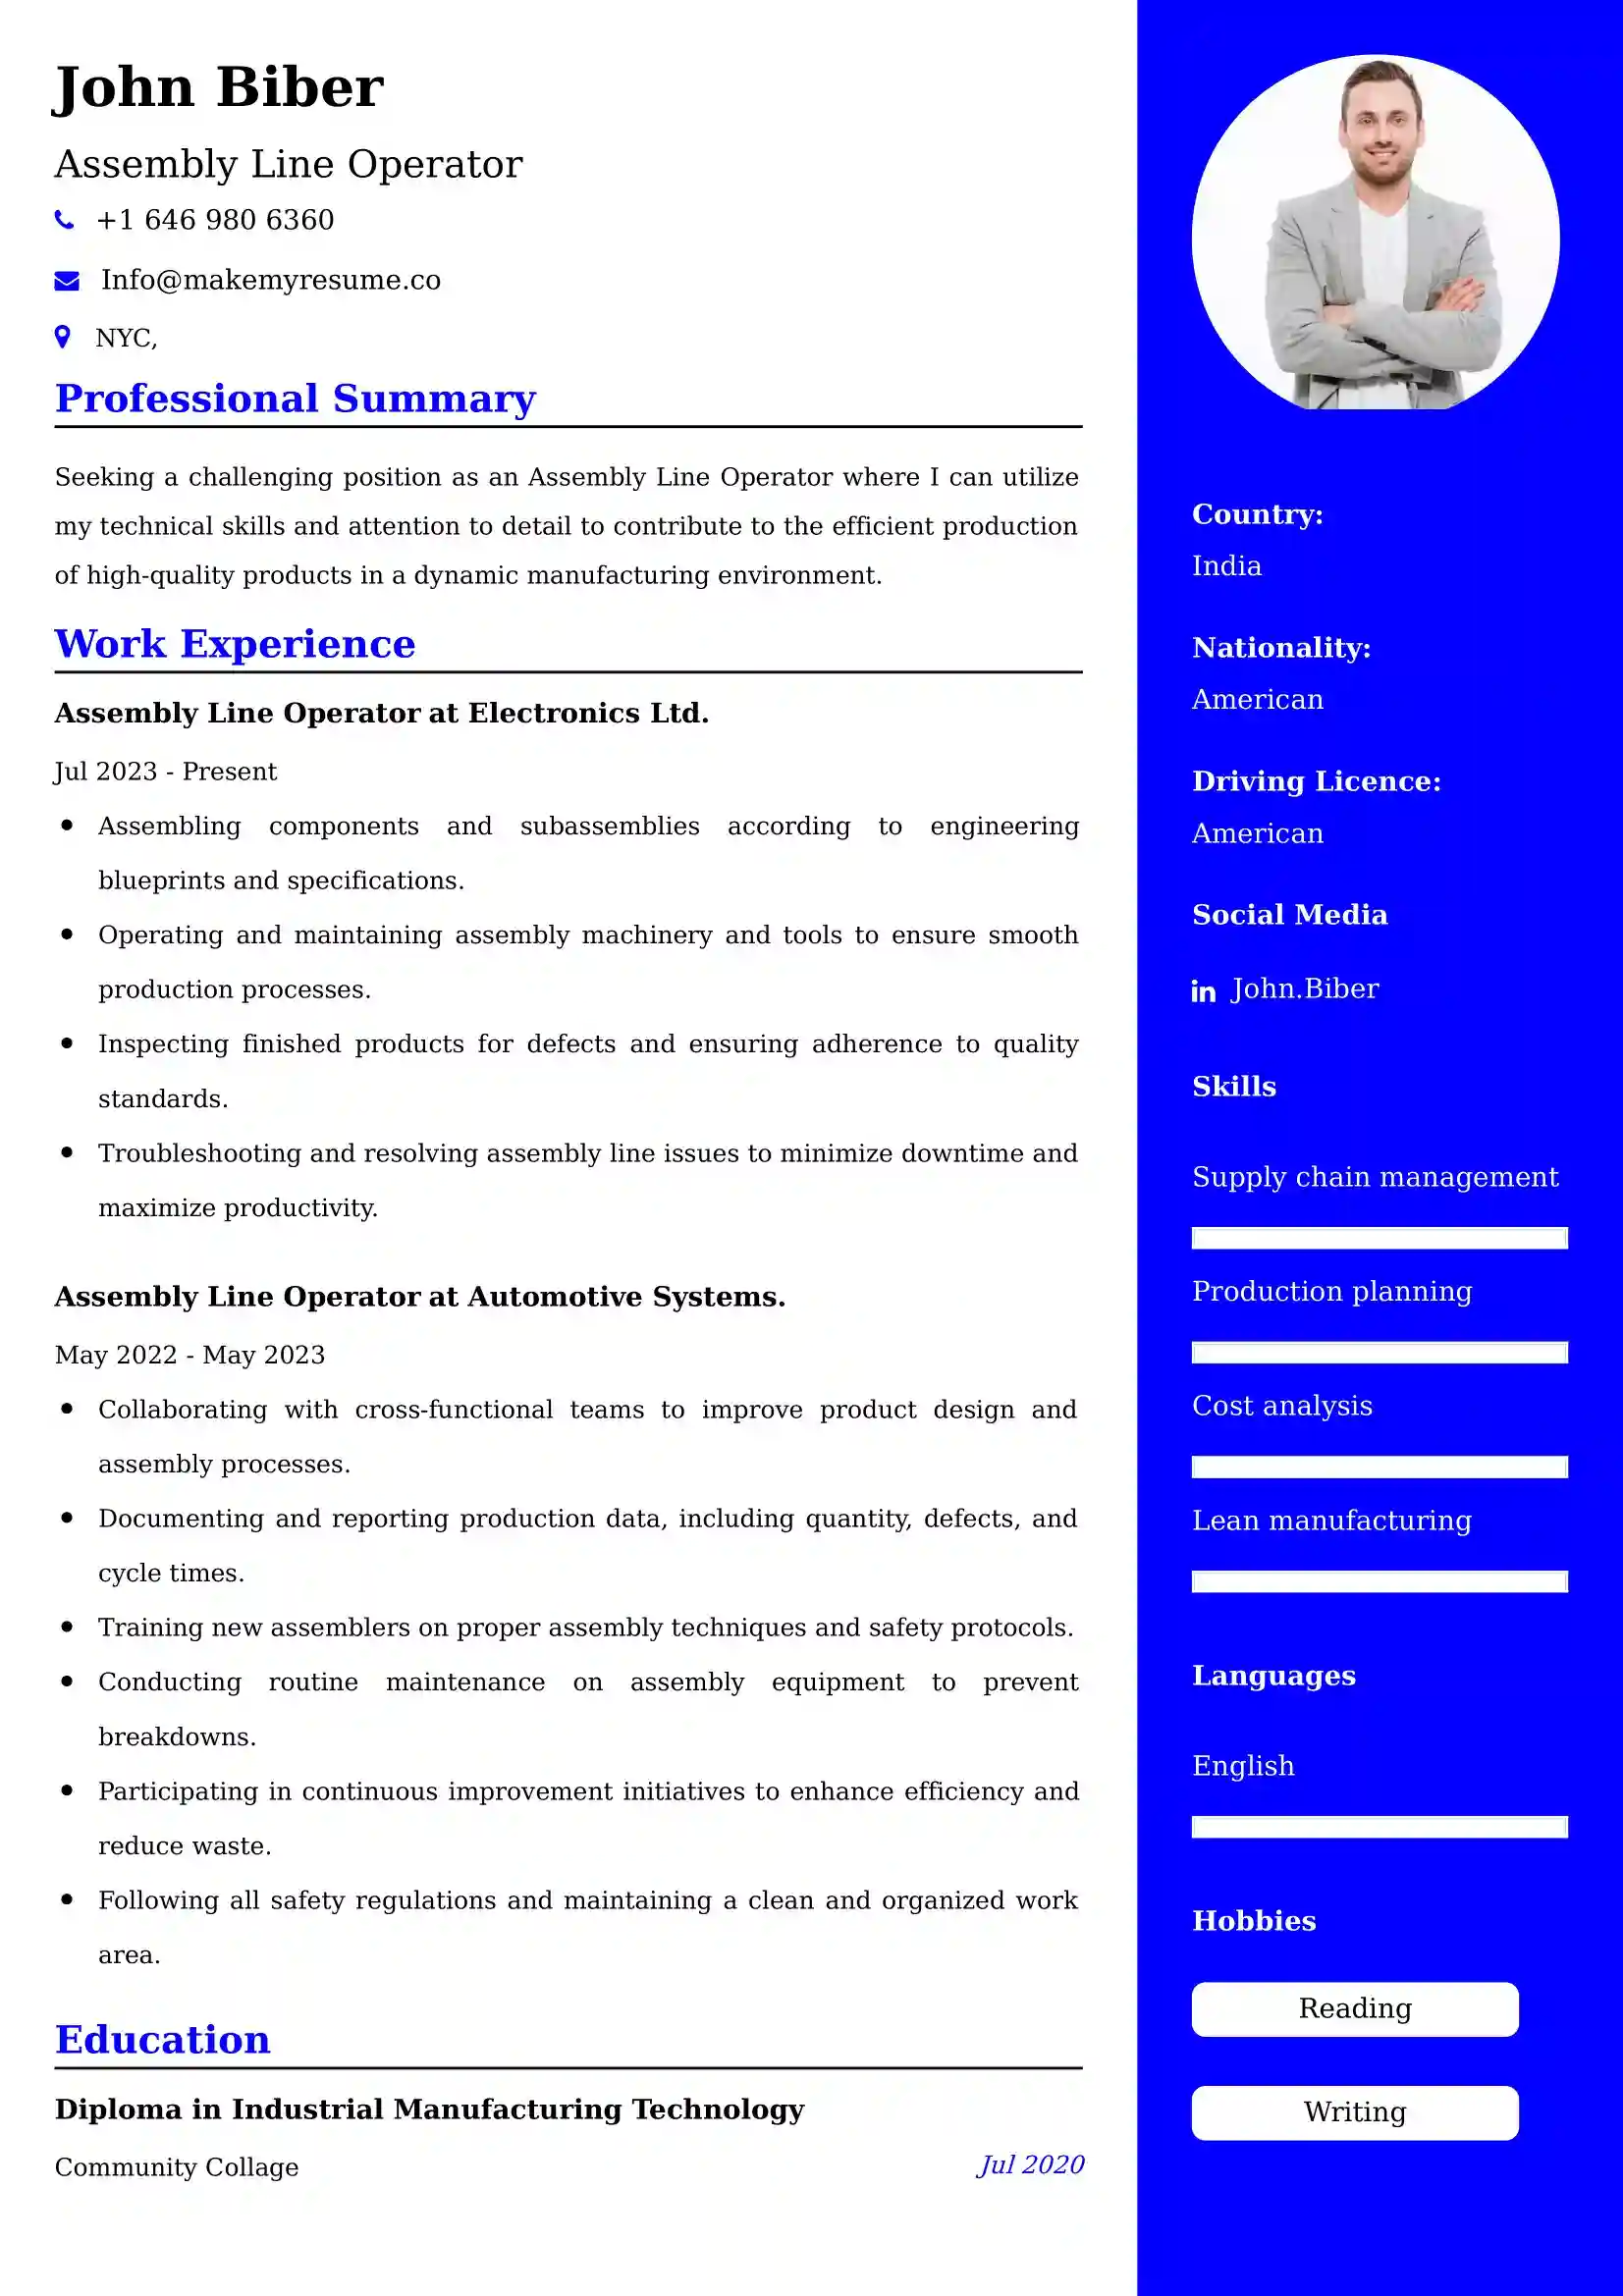 Best Assembly Line Operator Resume Examples for UK